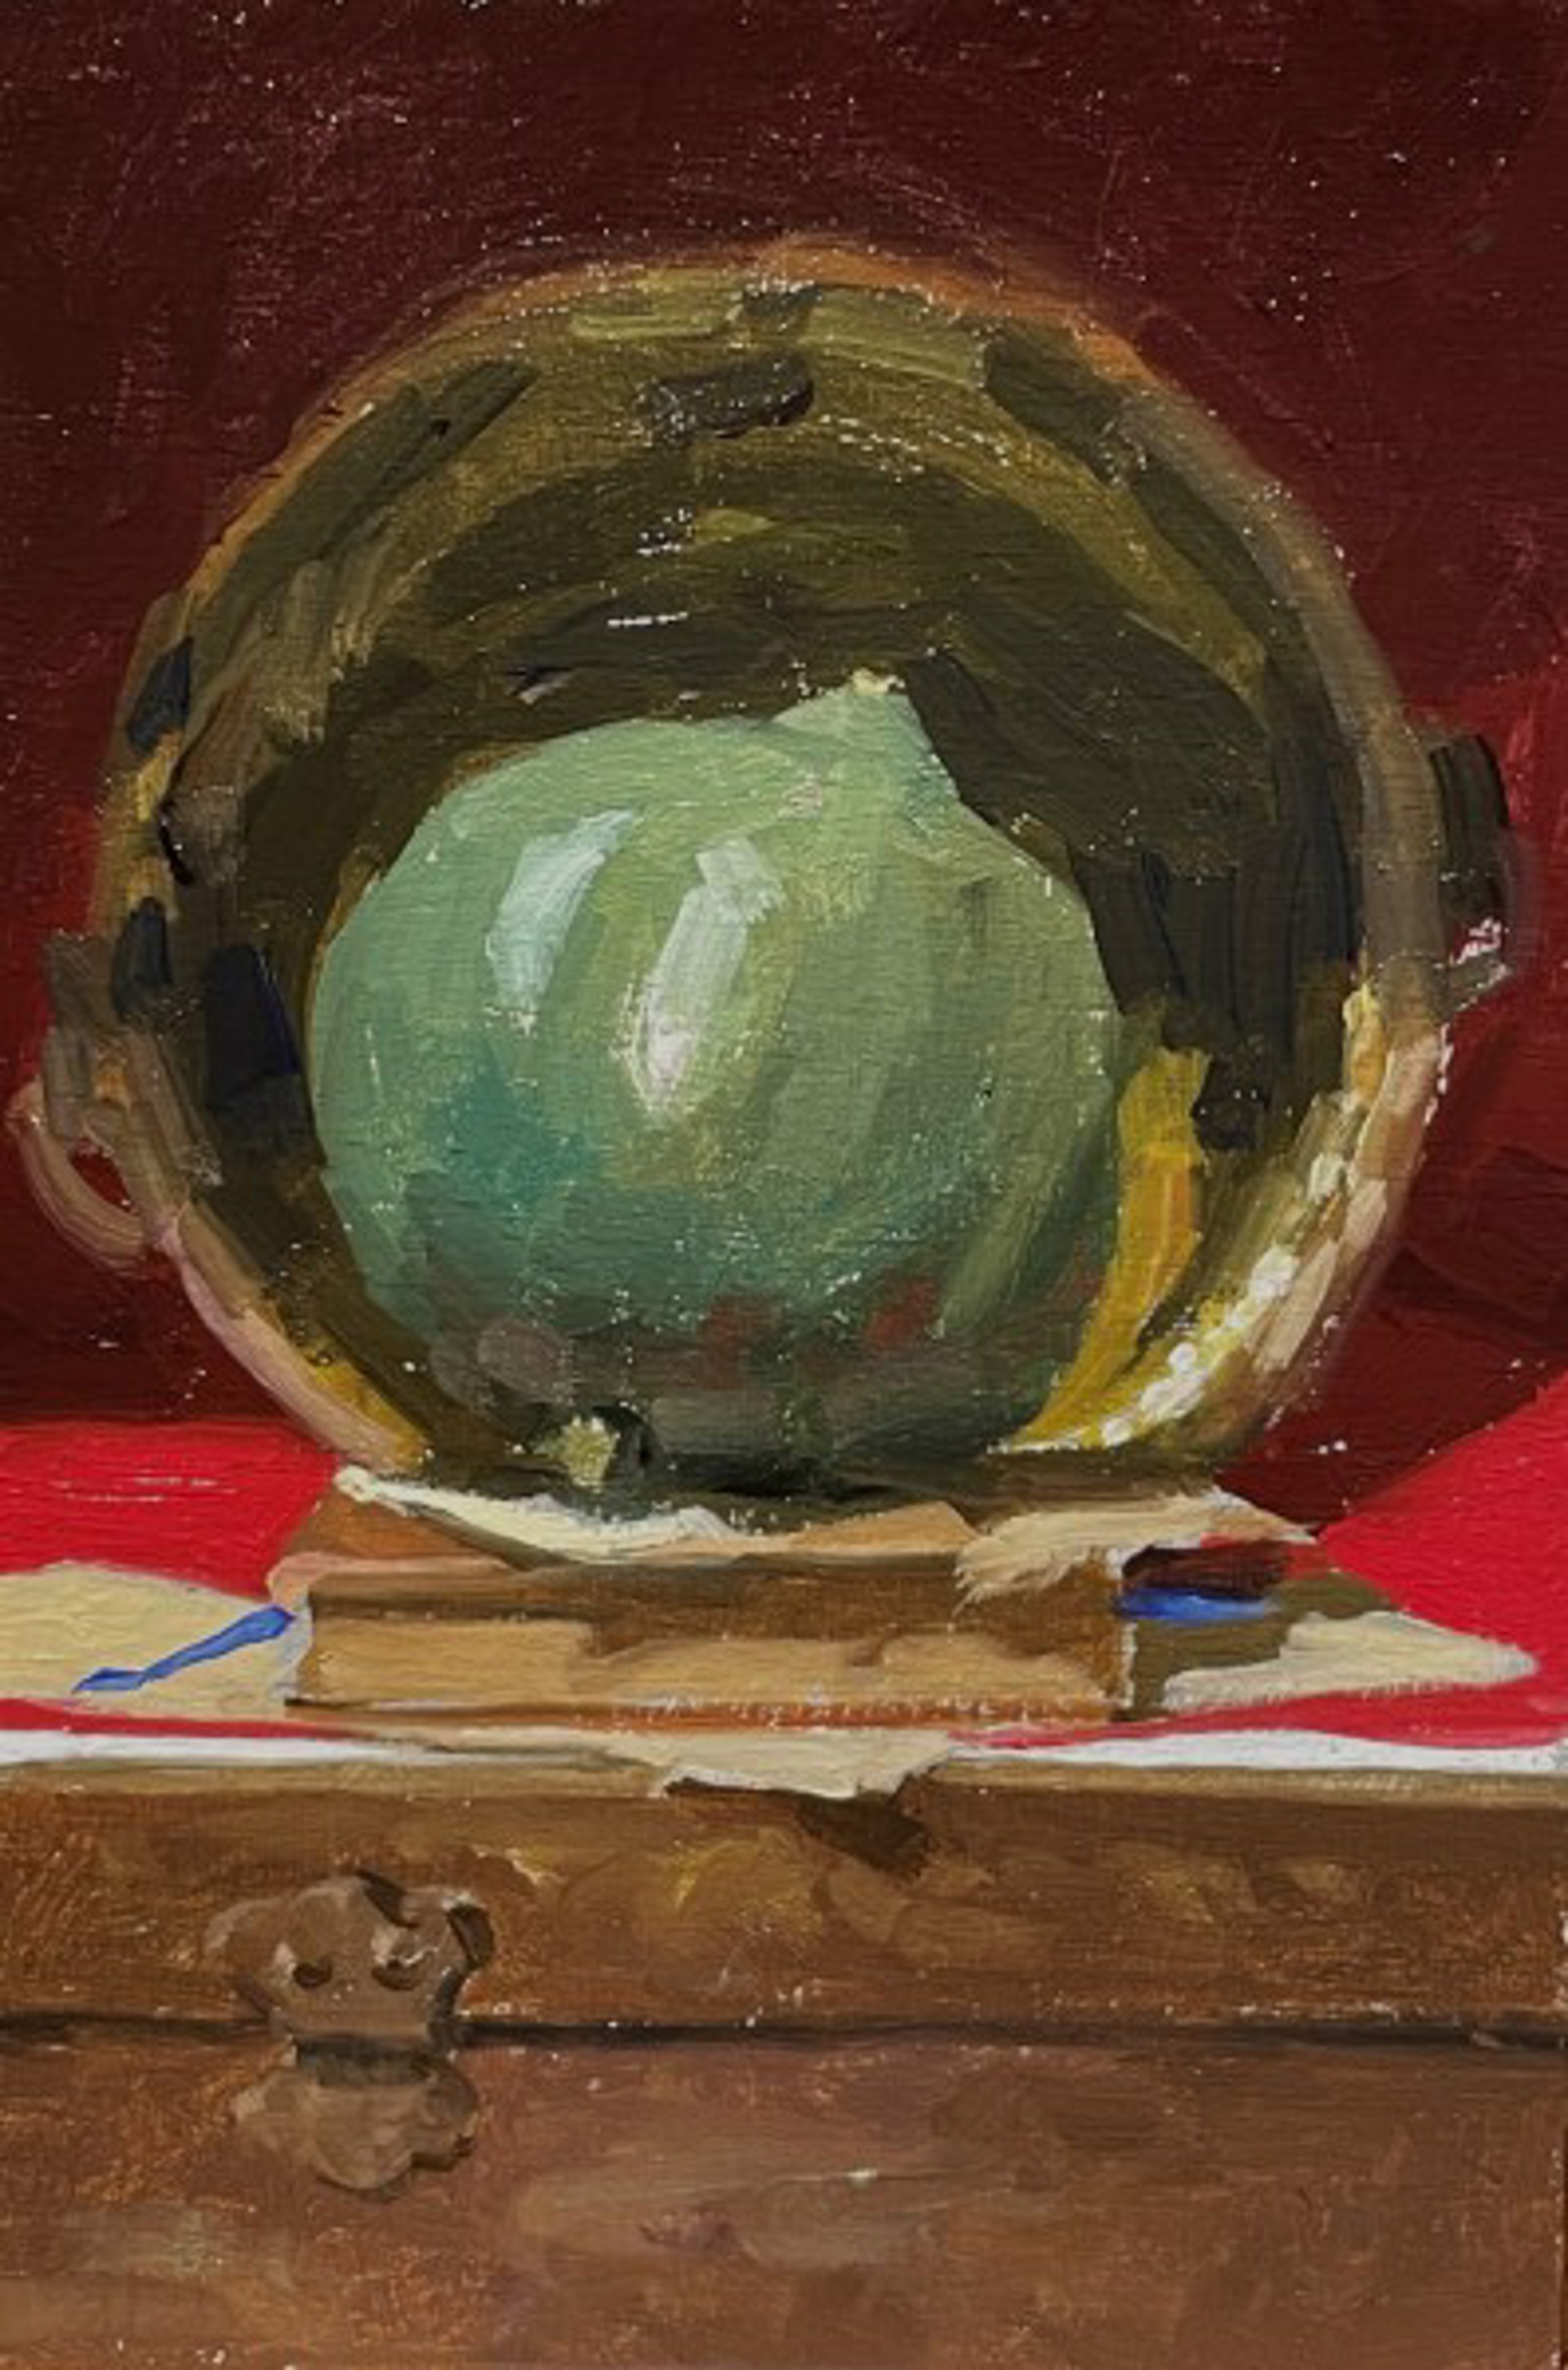 Acorn Squash on a Book, Study by Todd M. Casey